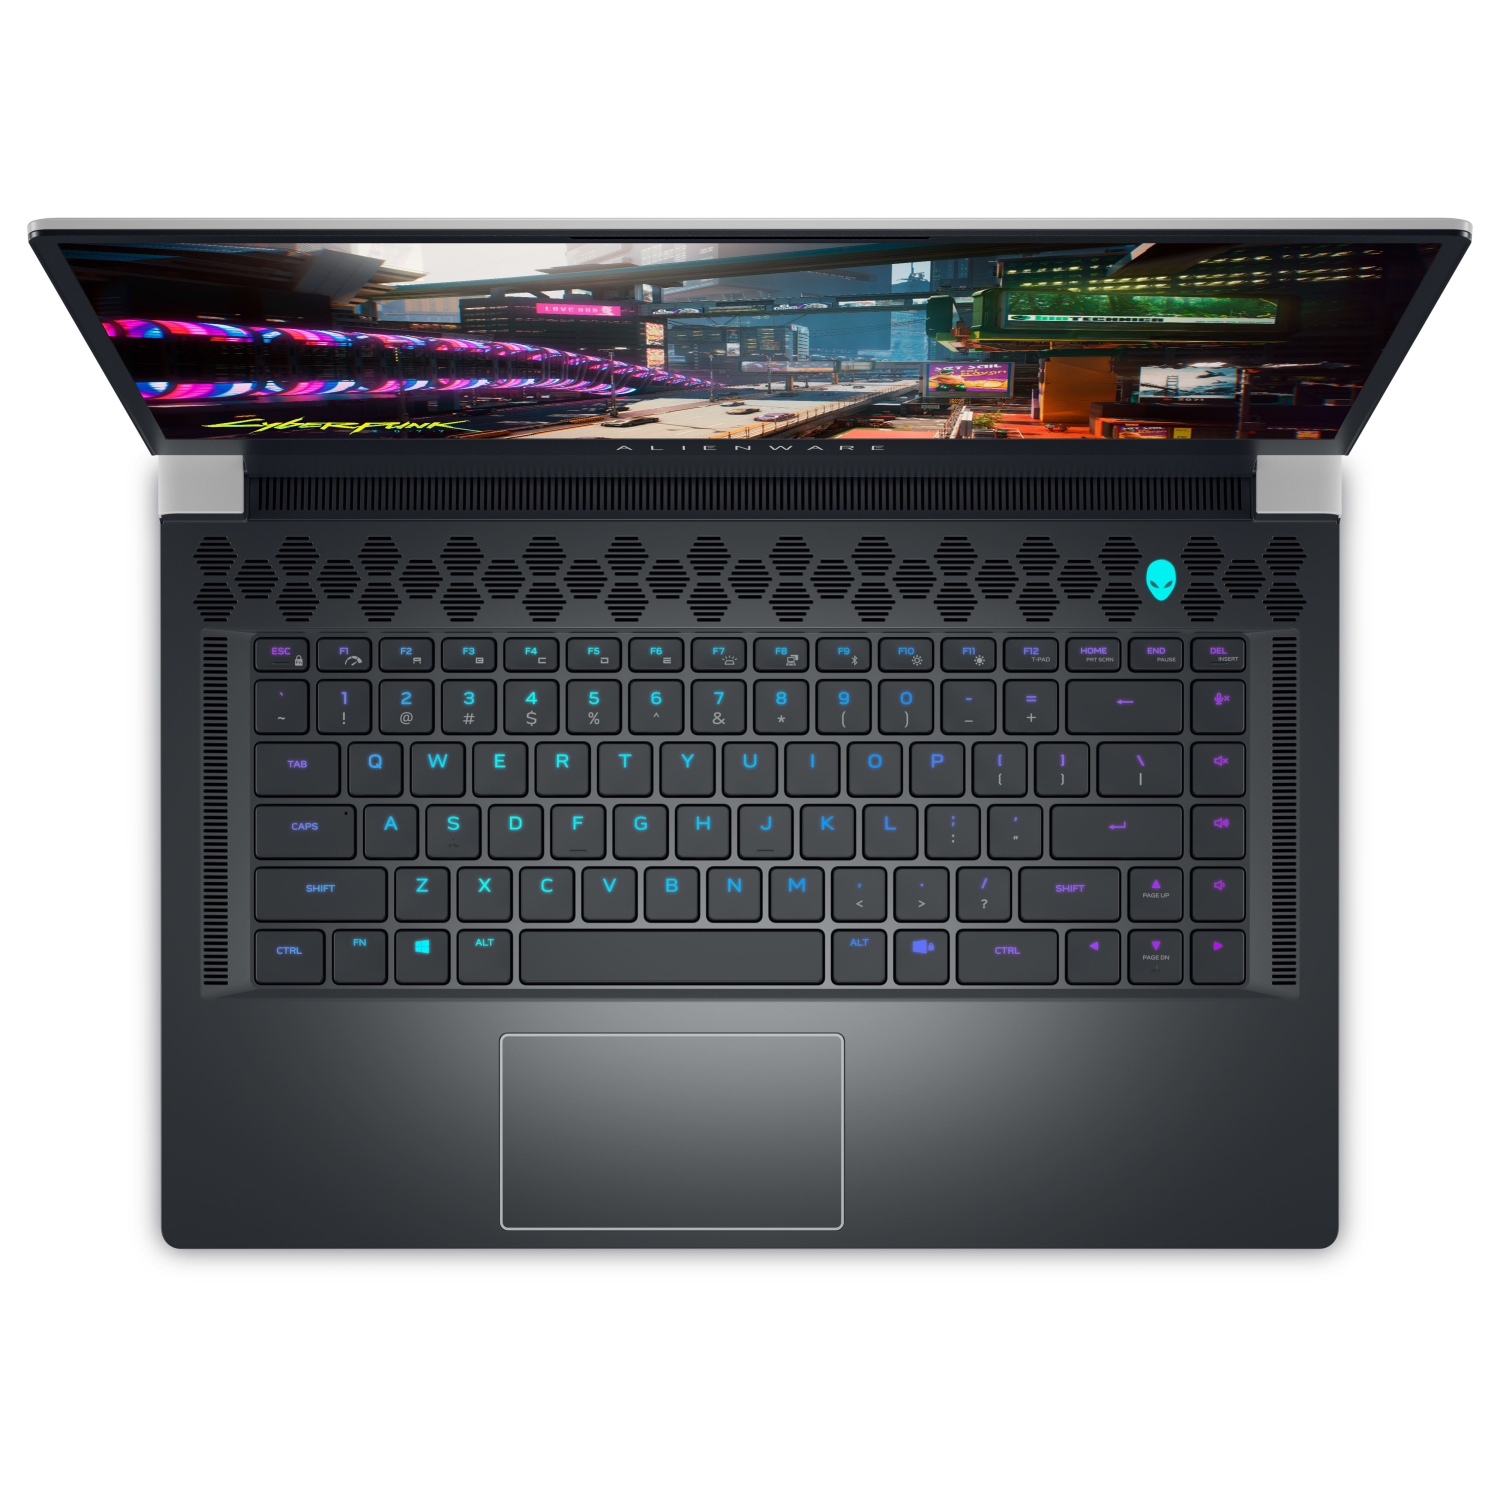 Refurbished (Excellent) – Dell Alienware X15 R2 Gaming Laptop (2022) | 15.6" FHD | Core i9 - 1TB SSD - 16GB RAM - 3070 Ti | 14 Cores @ 5 GHz - 12th Gen CPU - 8GB GDDR6X